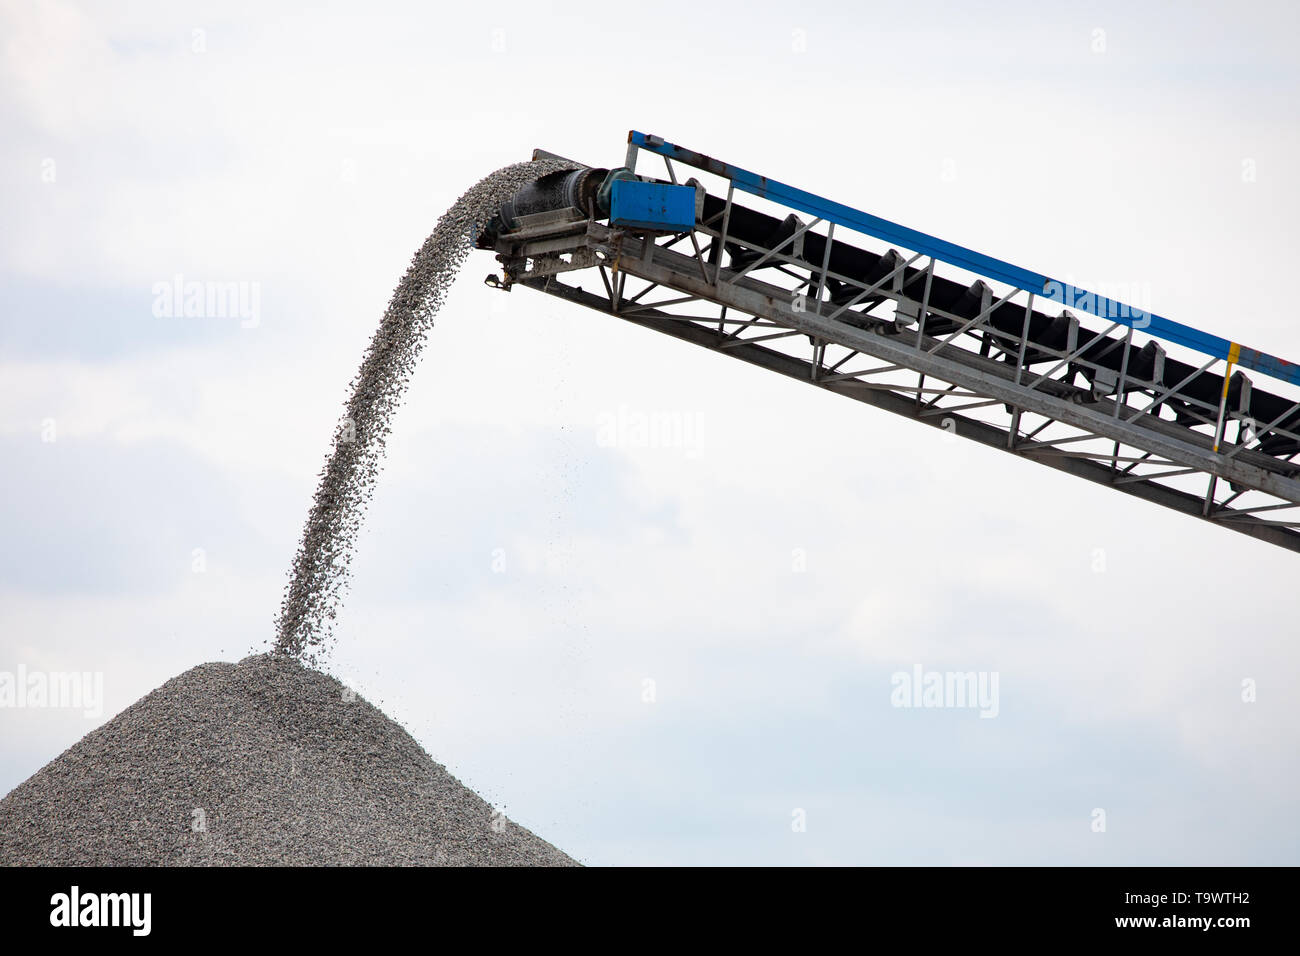 Industry International Domestic Shipping Telescopic Conveyor Belt Moving Rock Materials on a riverfront shipping route Stock Photo